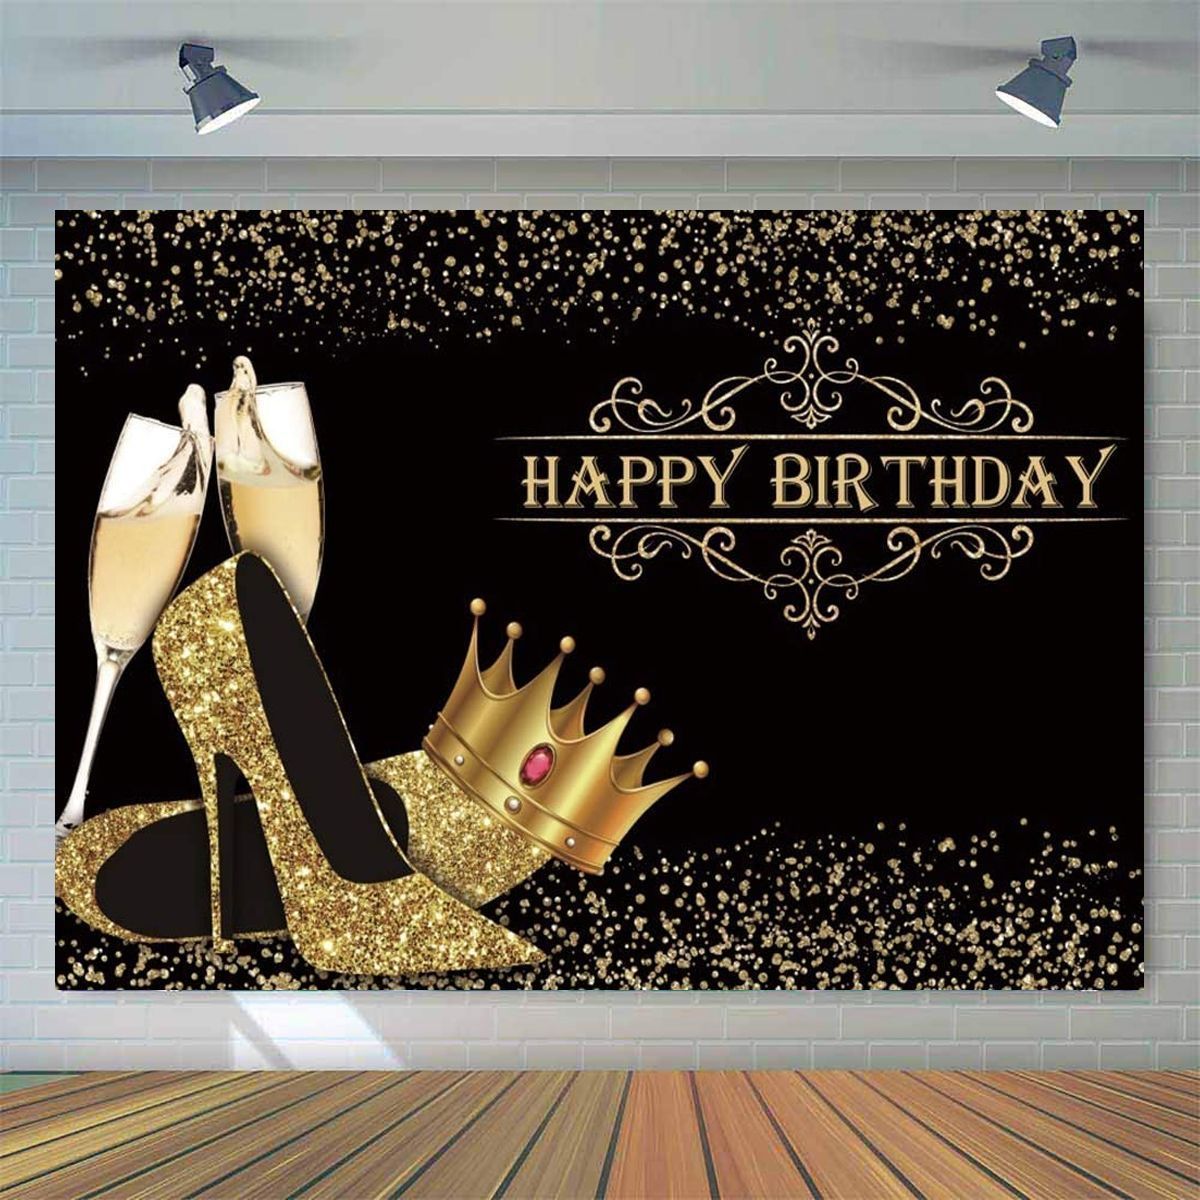 Happy-Birthday-Backdrop-Lady-Birthday-Prom-Party-Background-Shiny-Golden-Crown-High-Heel-Party-Banne-1759430